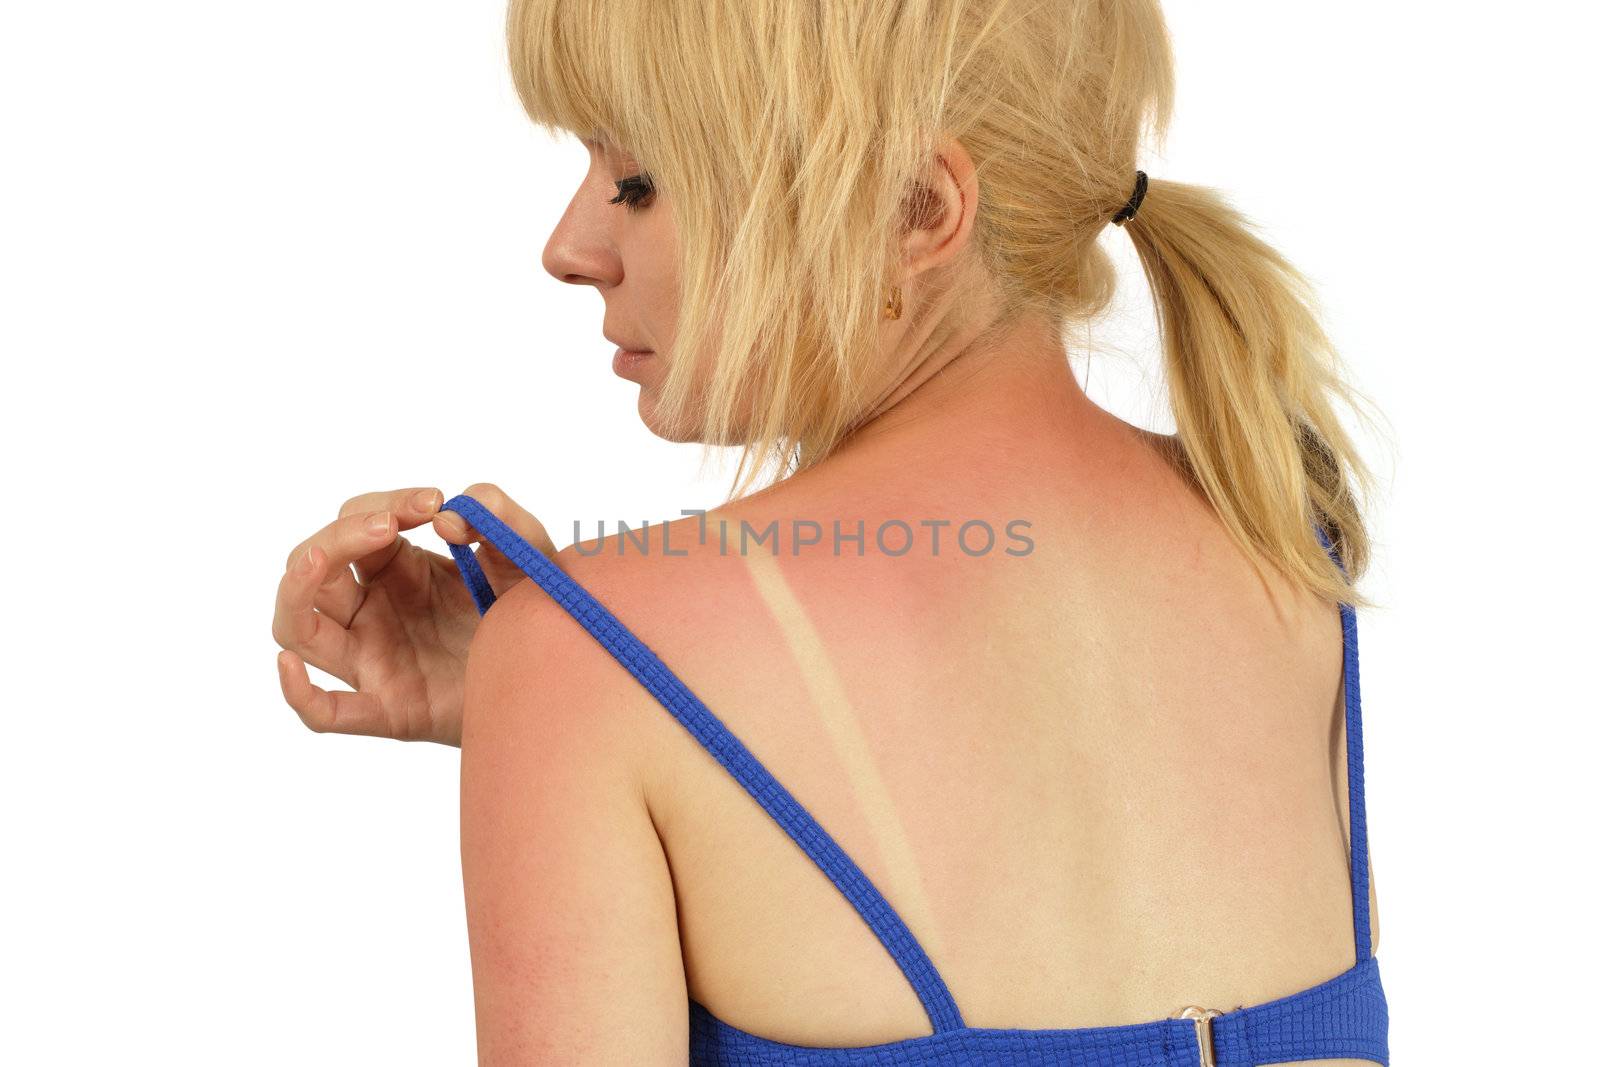 Blond female with a bad sunburn on her back.
